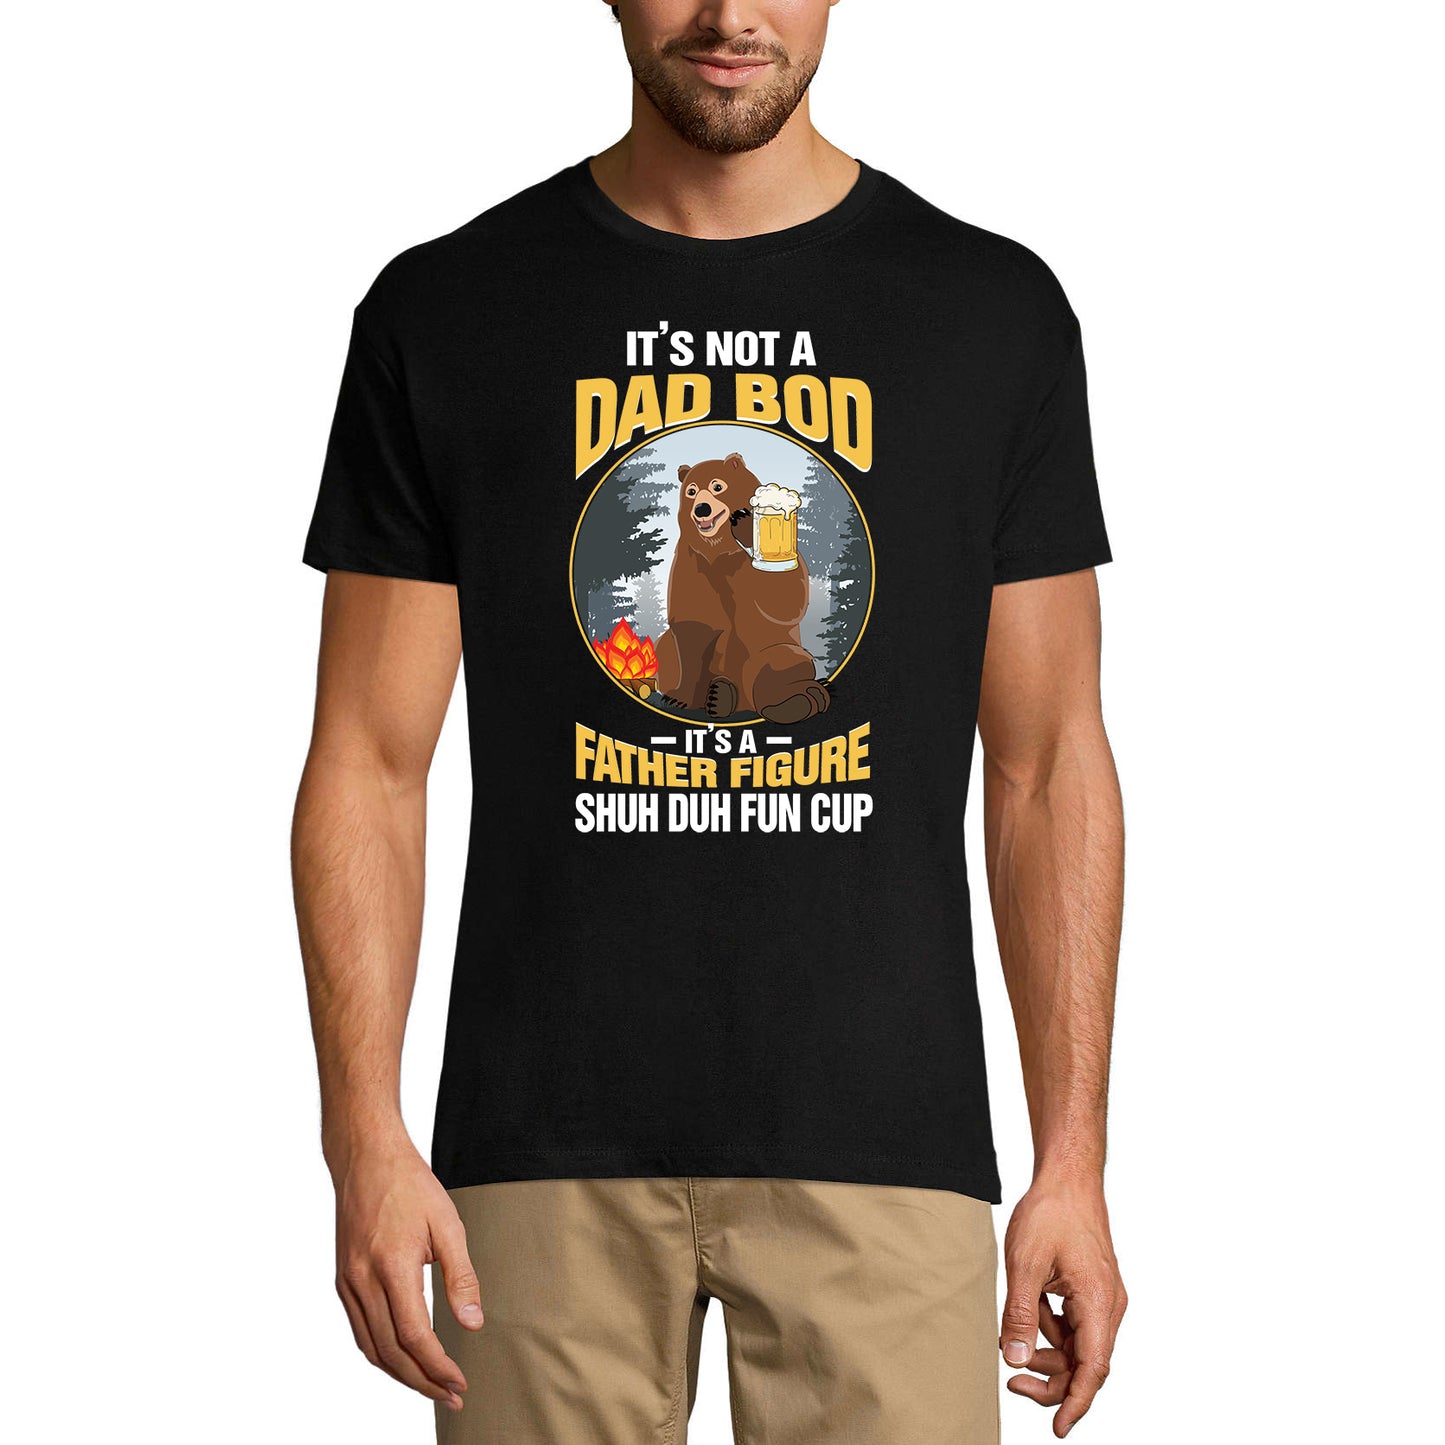 ULTRABASIC Men's Funny T-Shirt It's Not a Dad Bod It's a Father Figure - Bear Beer Lover Tee Shirt